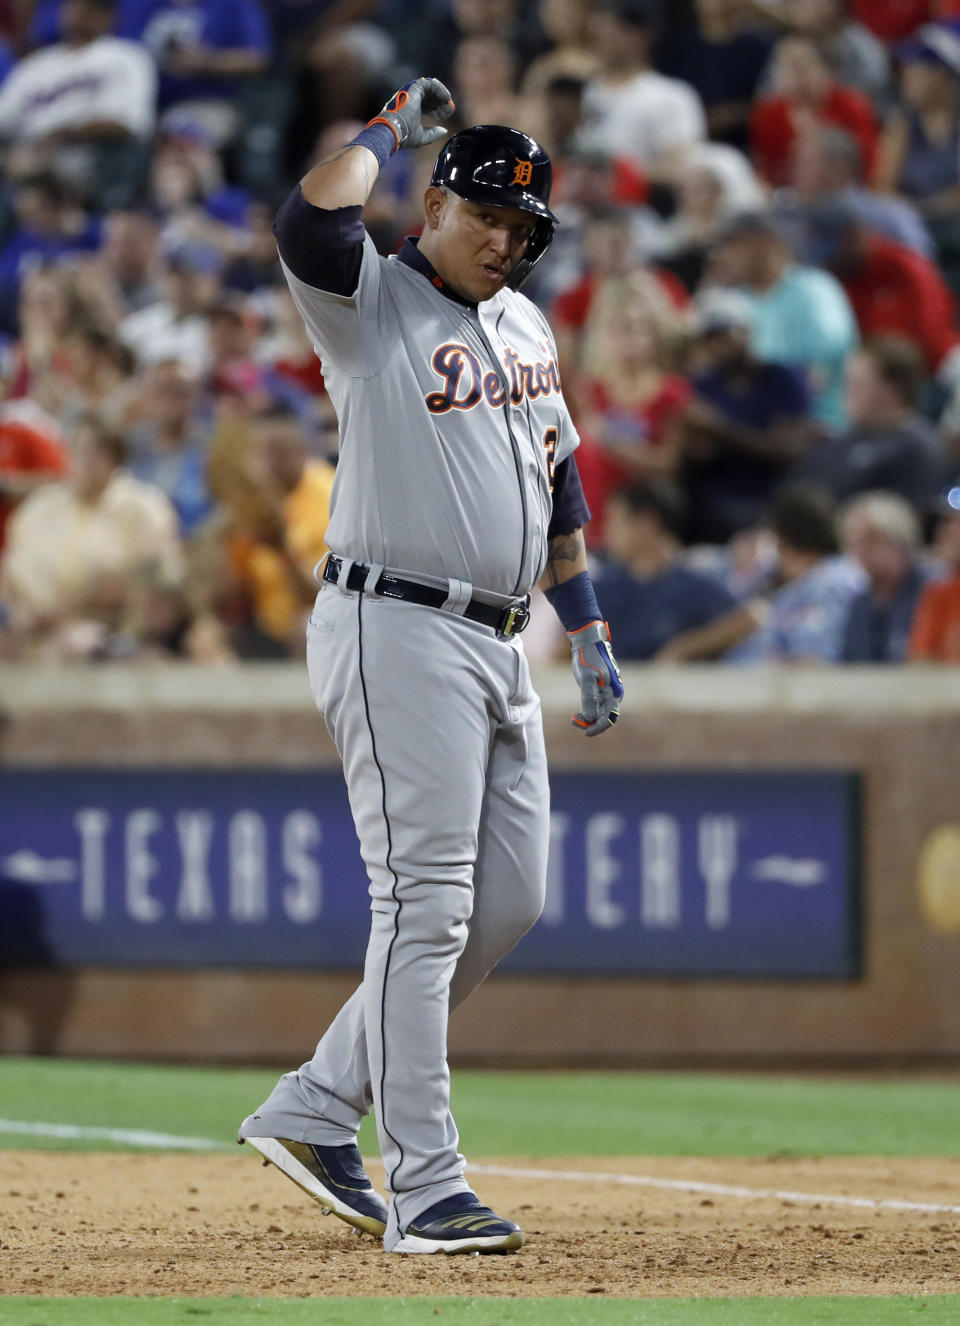 Detroit Tigers' Miguel Cabrera signals to the dugout after hitting an RBI single off Texas Rangers relief pitcher Jesse Chavez during the eighth inning of a baseball game in Arlington, Texas, Friday, Aug. 2, 2019. (AP Photo/Tony Gutierrez)